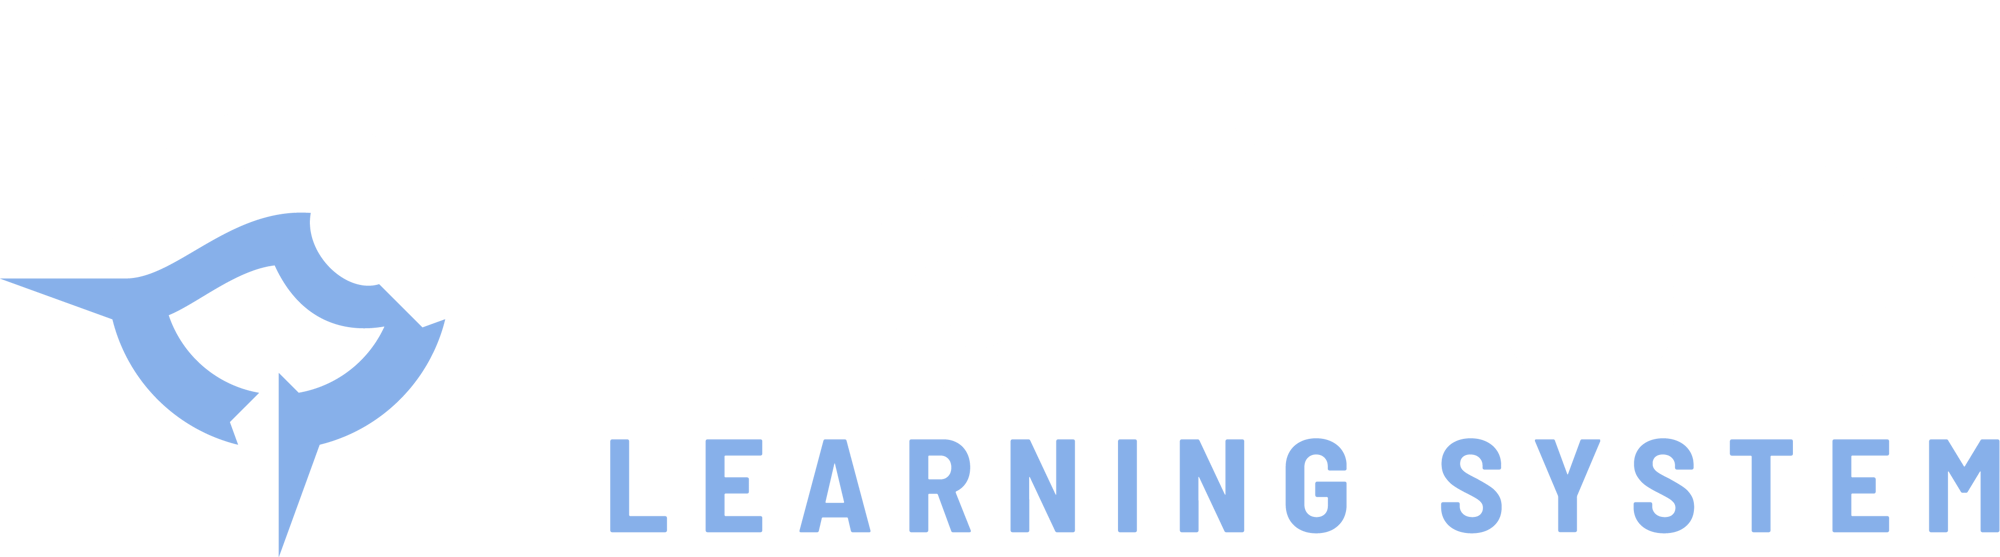 Mariners Learning System | Help Desk